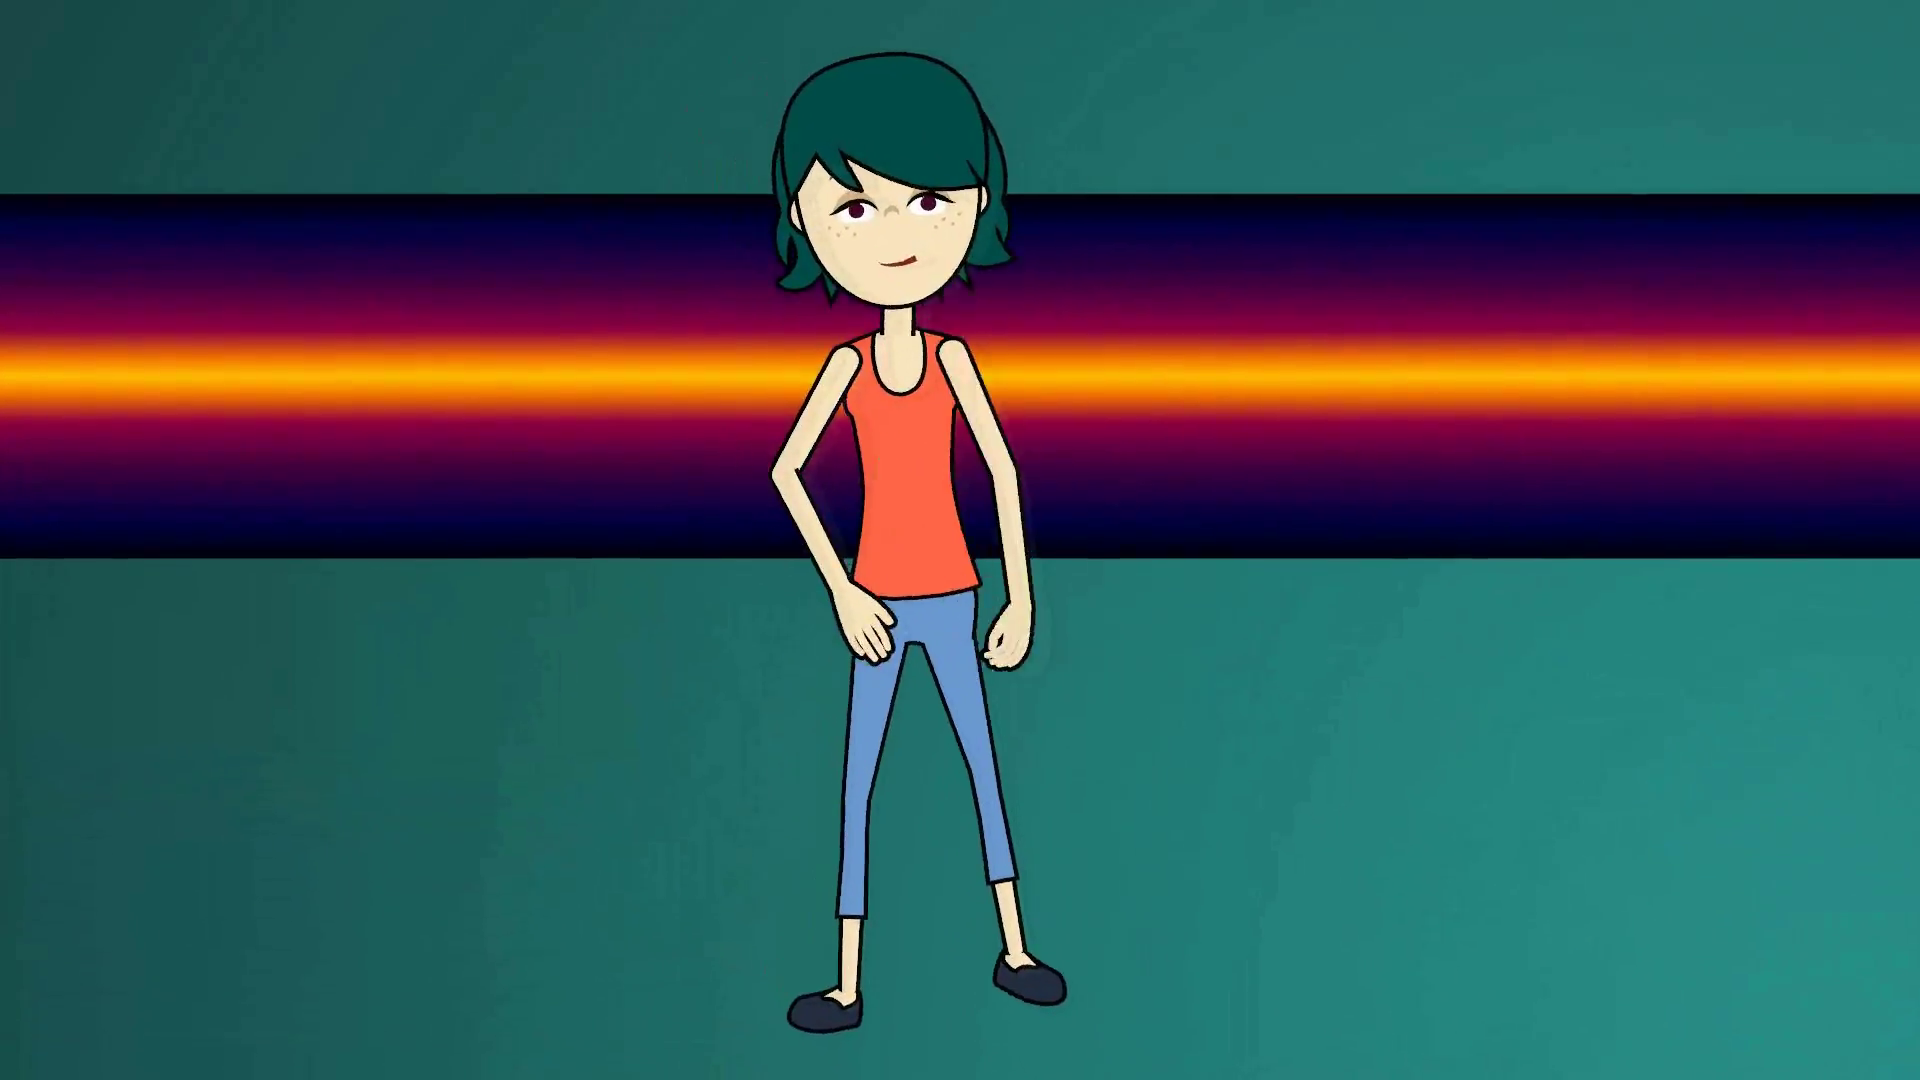 Cartoon Girl Dancing With Colorful Shapes In Background: Loop Motion Background   Videoblocks - Animated Dancing, Transparent background PNG HD thumbnail